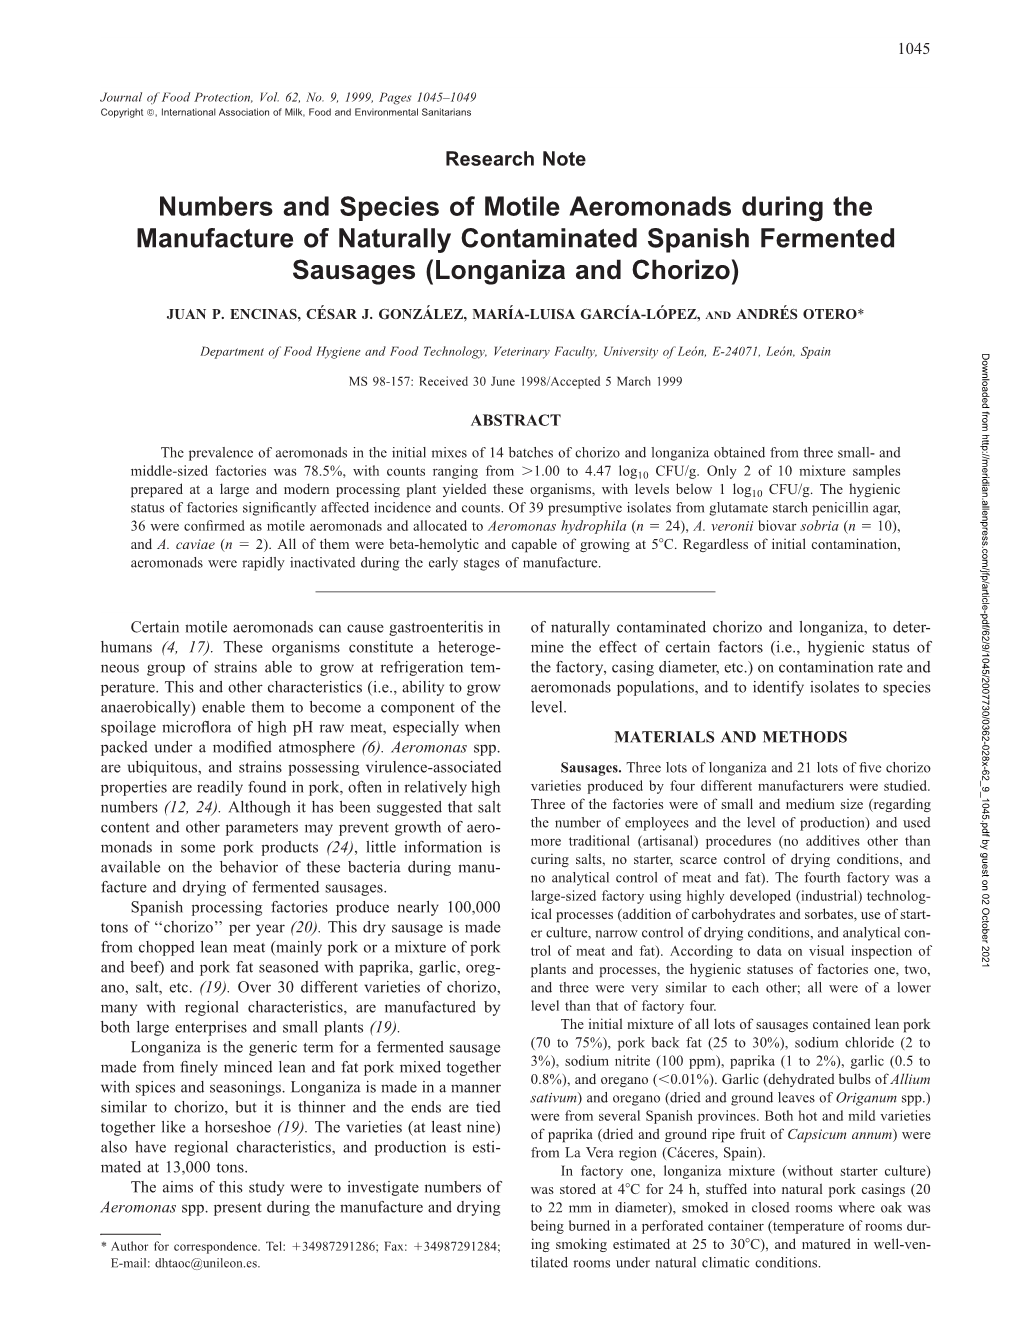 Numbers and Species of Motile Aeromonads During the Manufacture of Naturally Contaminated Spanish Fermented Sausages (Longaniza and Chorizo)